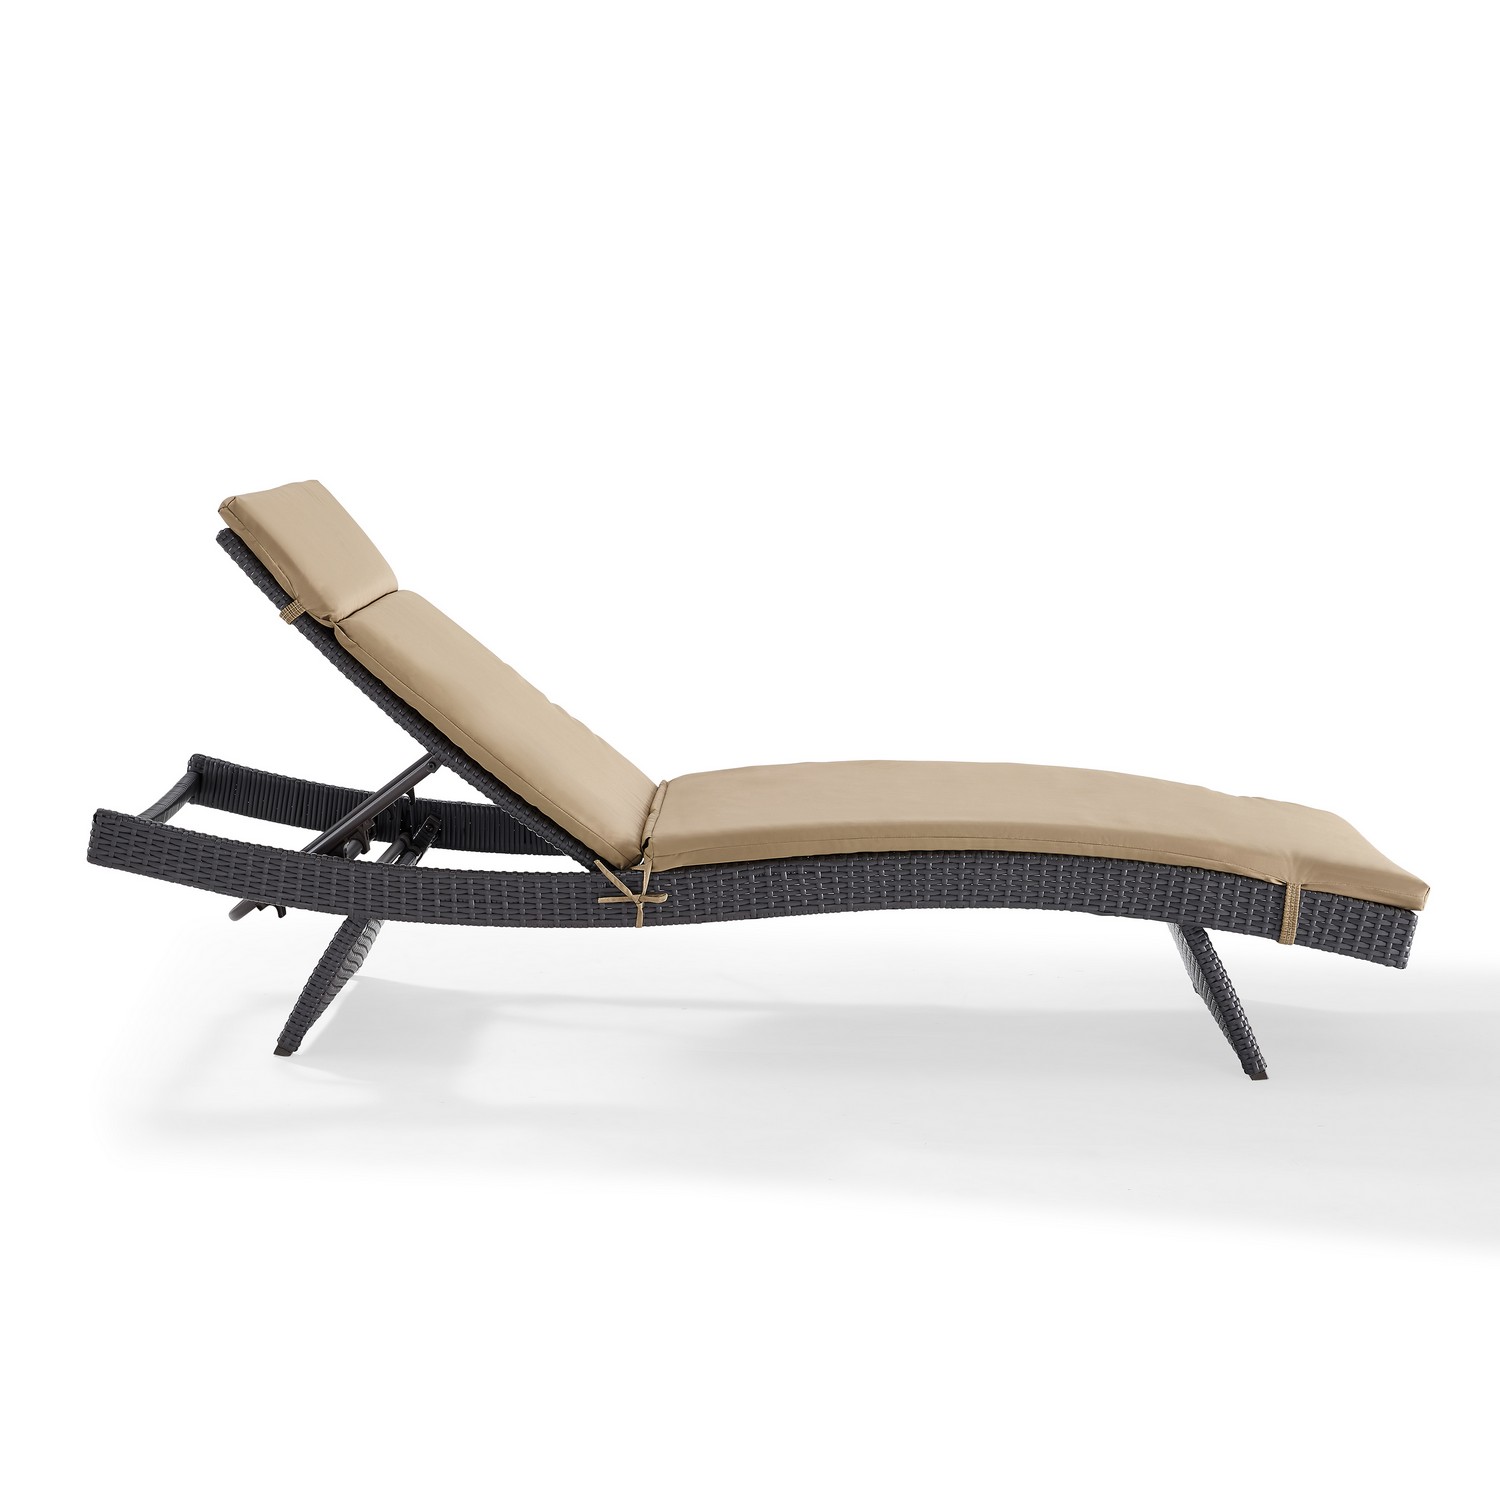 Crosley Biscayne Outdoor Wicker Chaise Lounge - Mocha/Brown